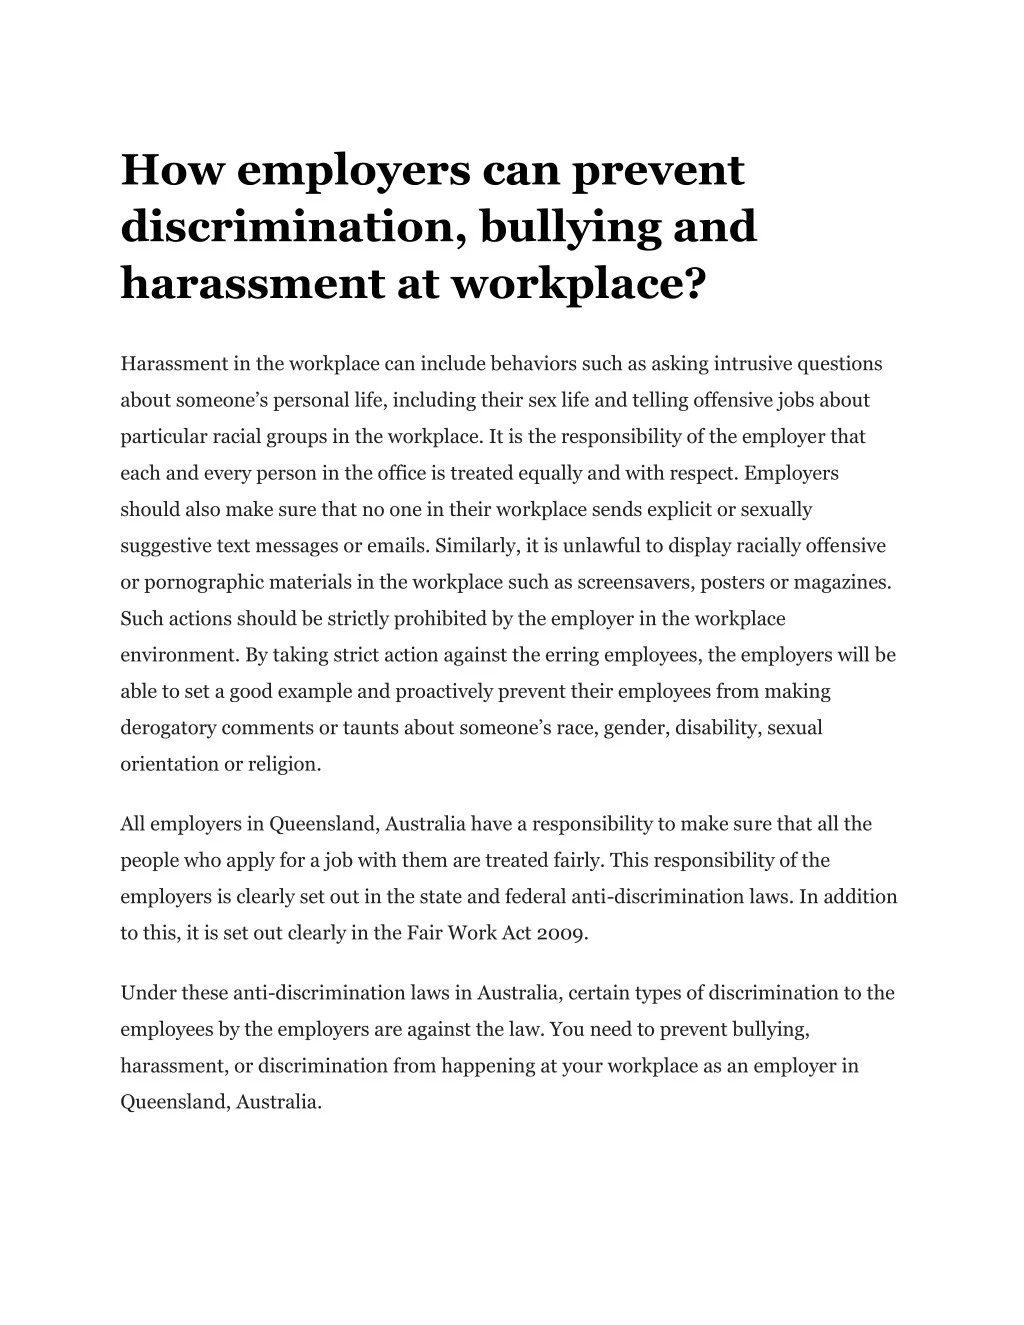 how employers can prevent discrimination bullying